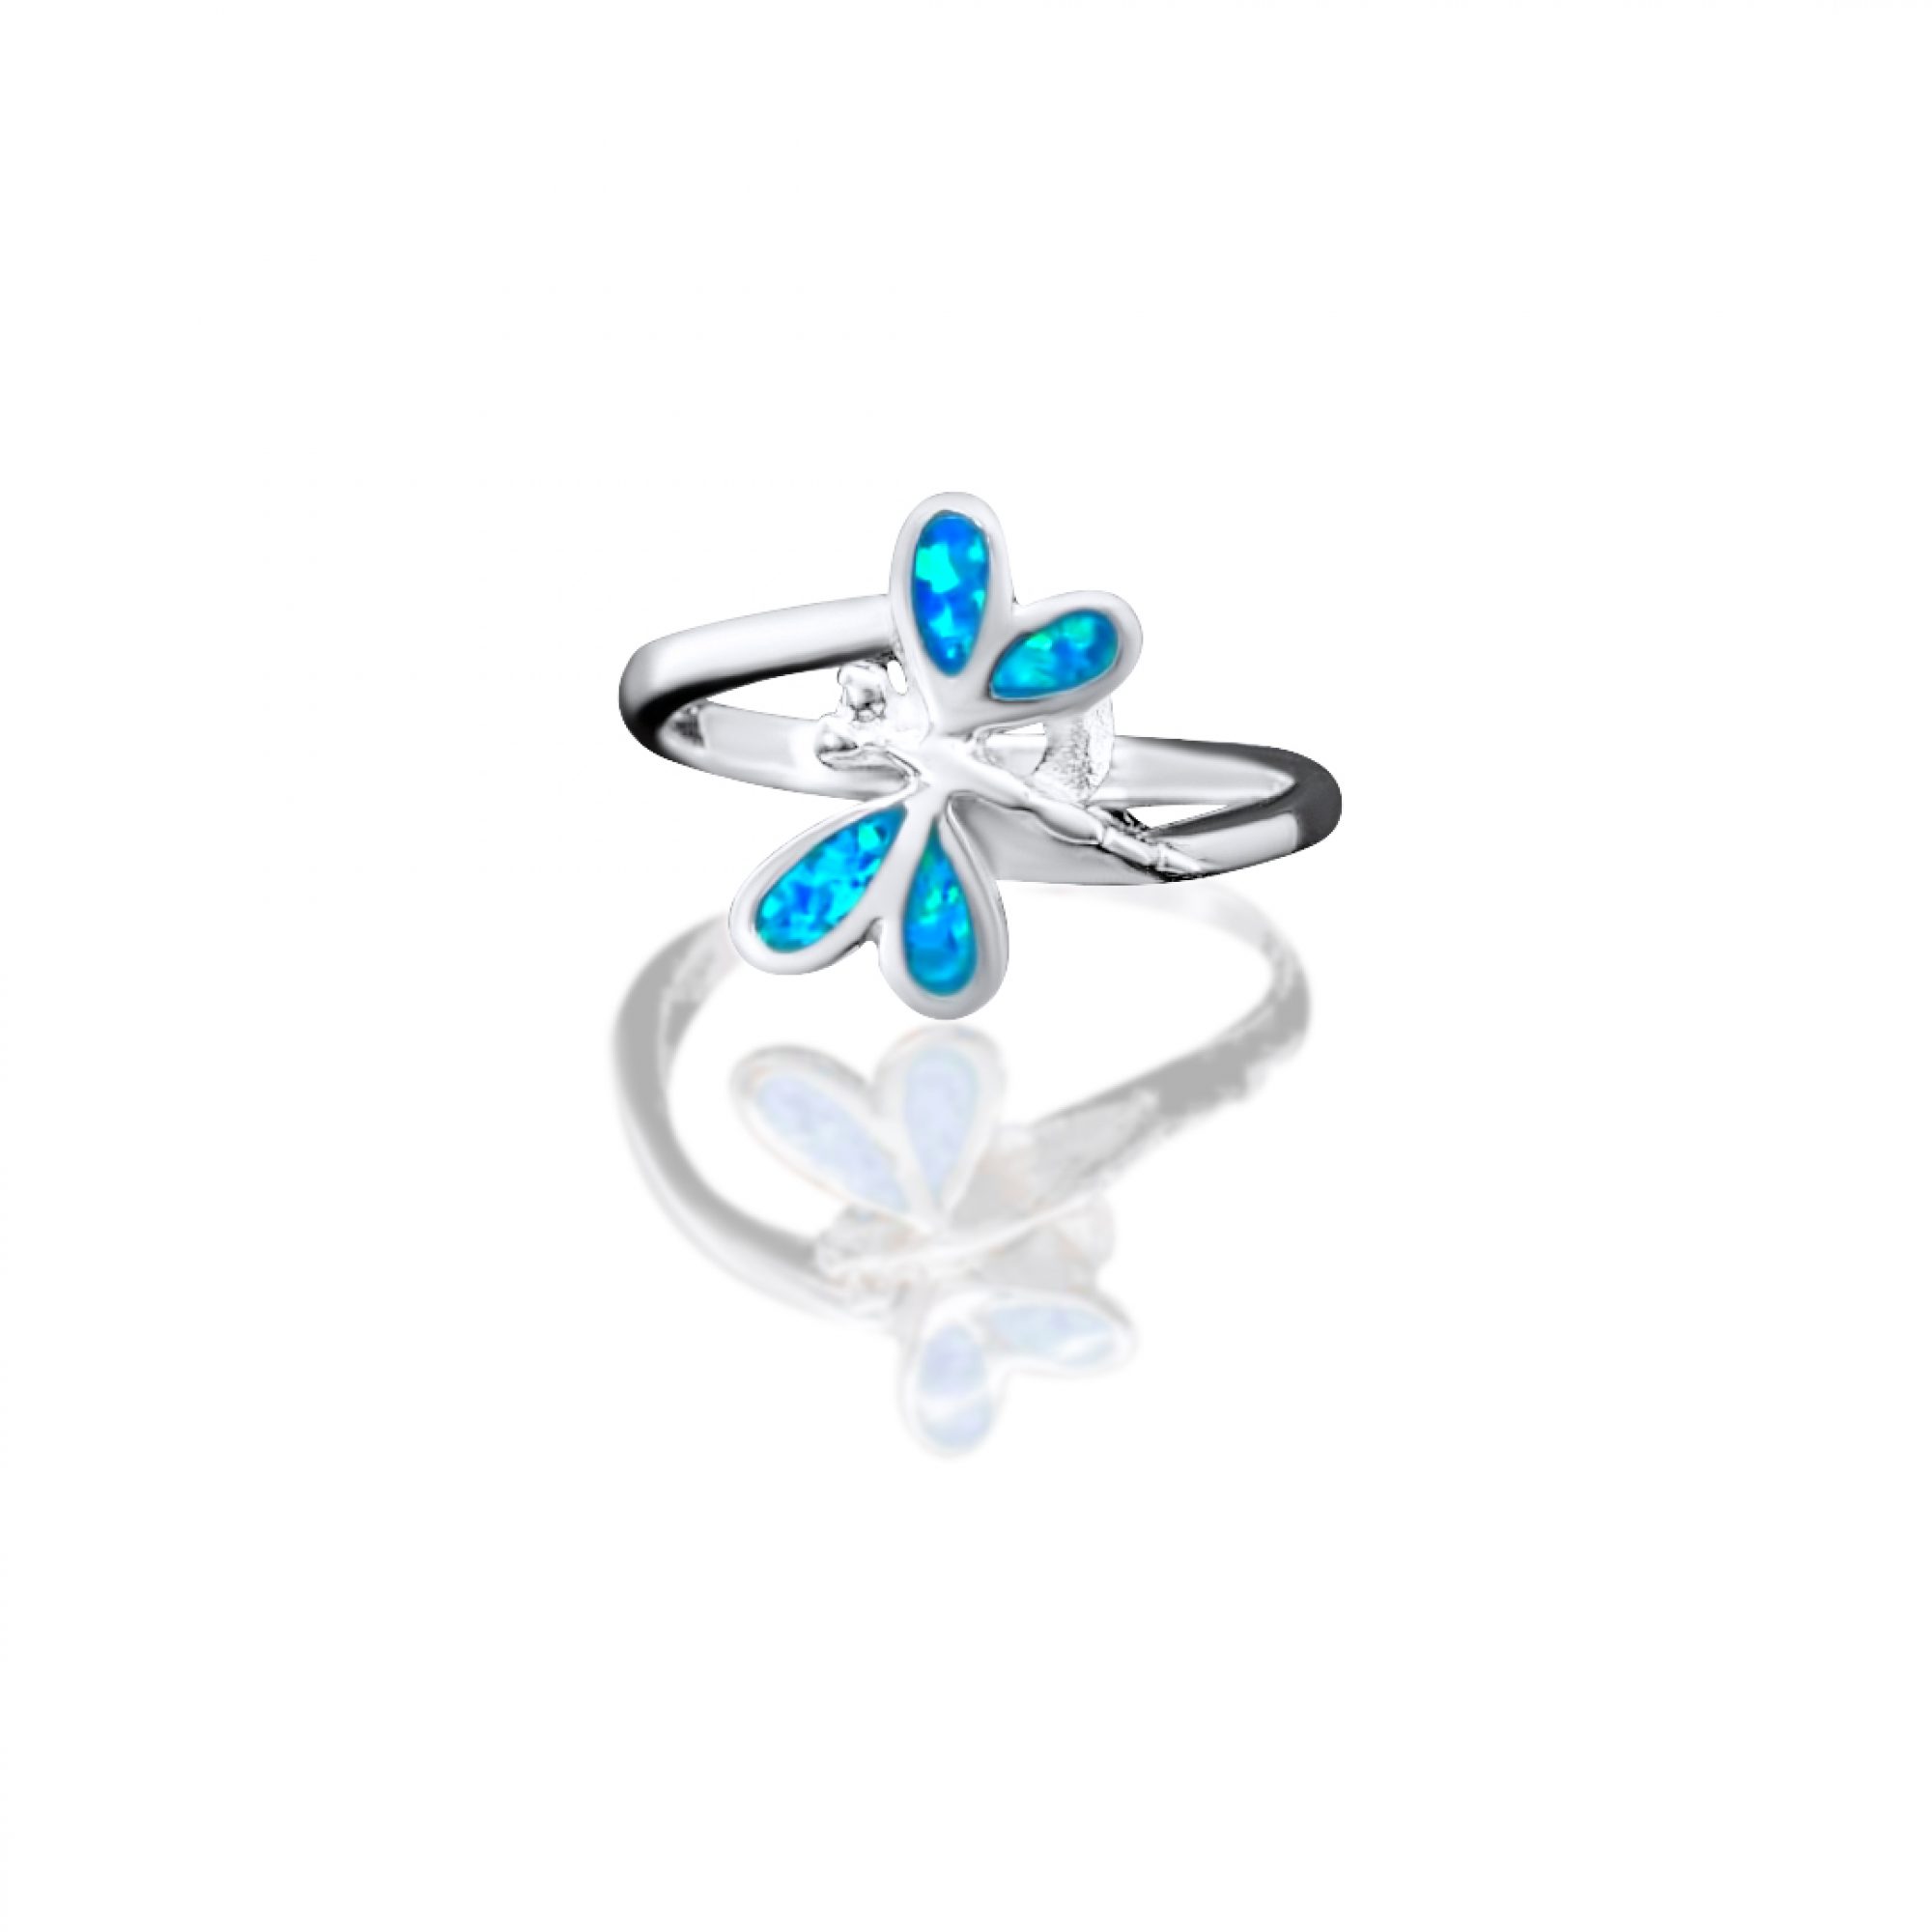 Silver dragonfly ring with opal stones